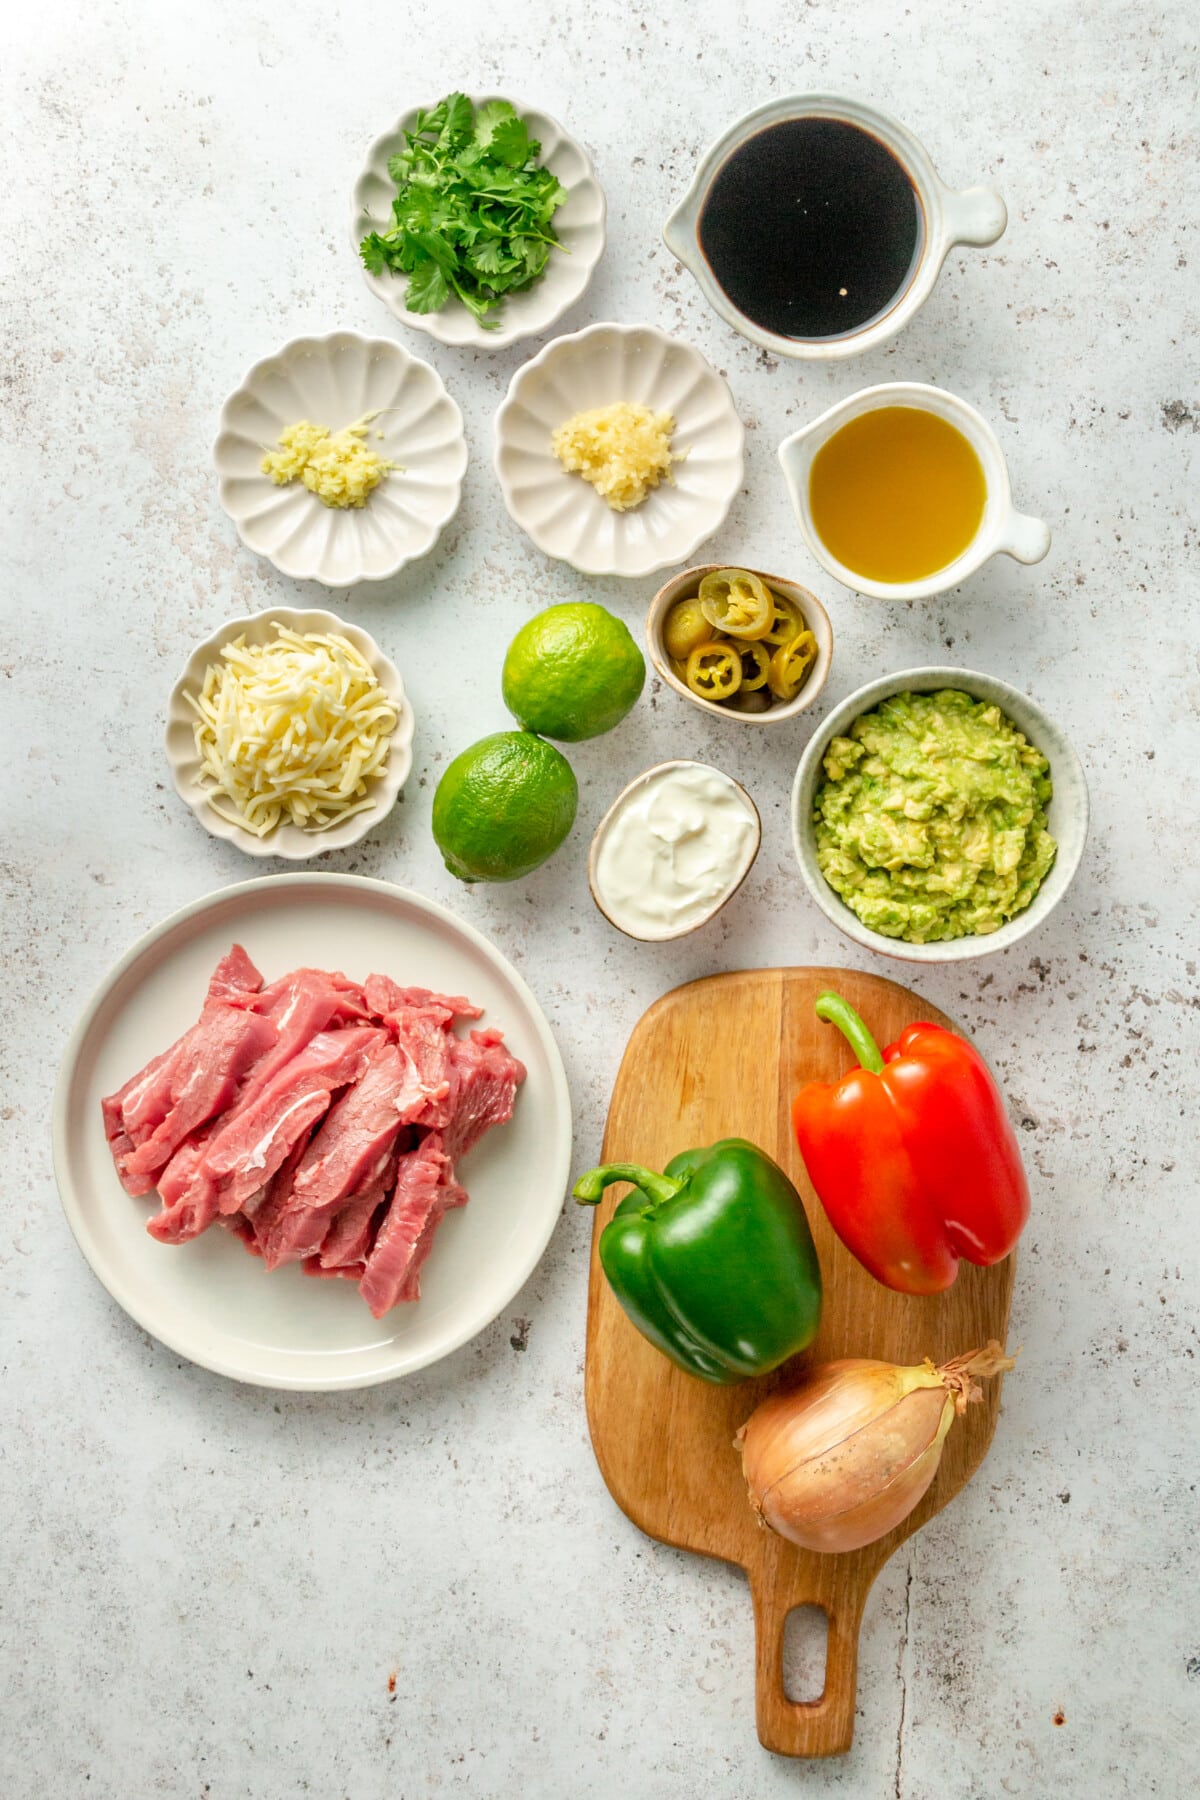 Ingredients for beef fajitas sit in a variety of plates and bowls on a light grey surface.